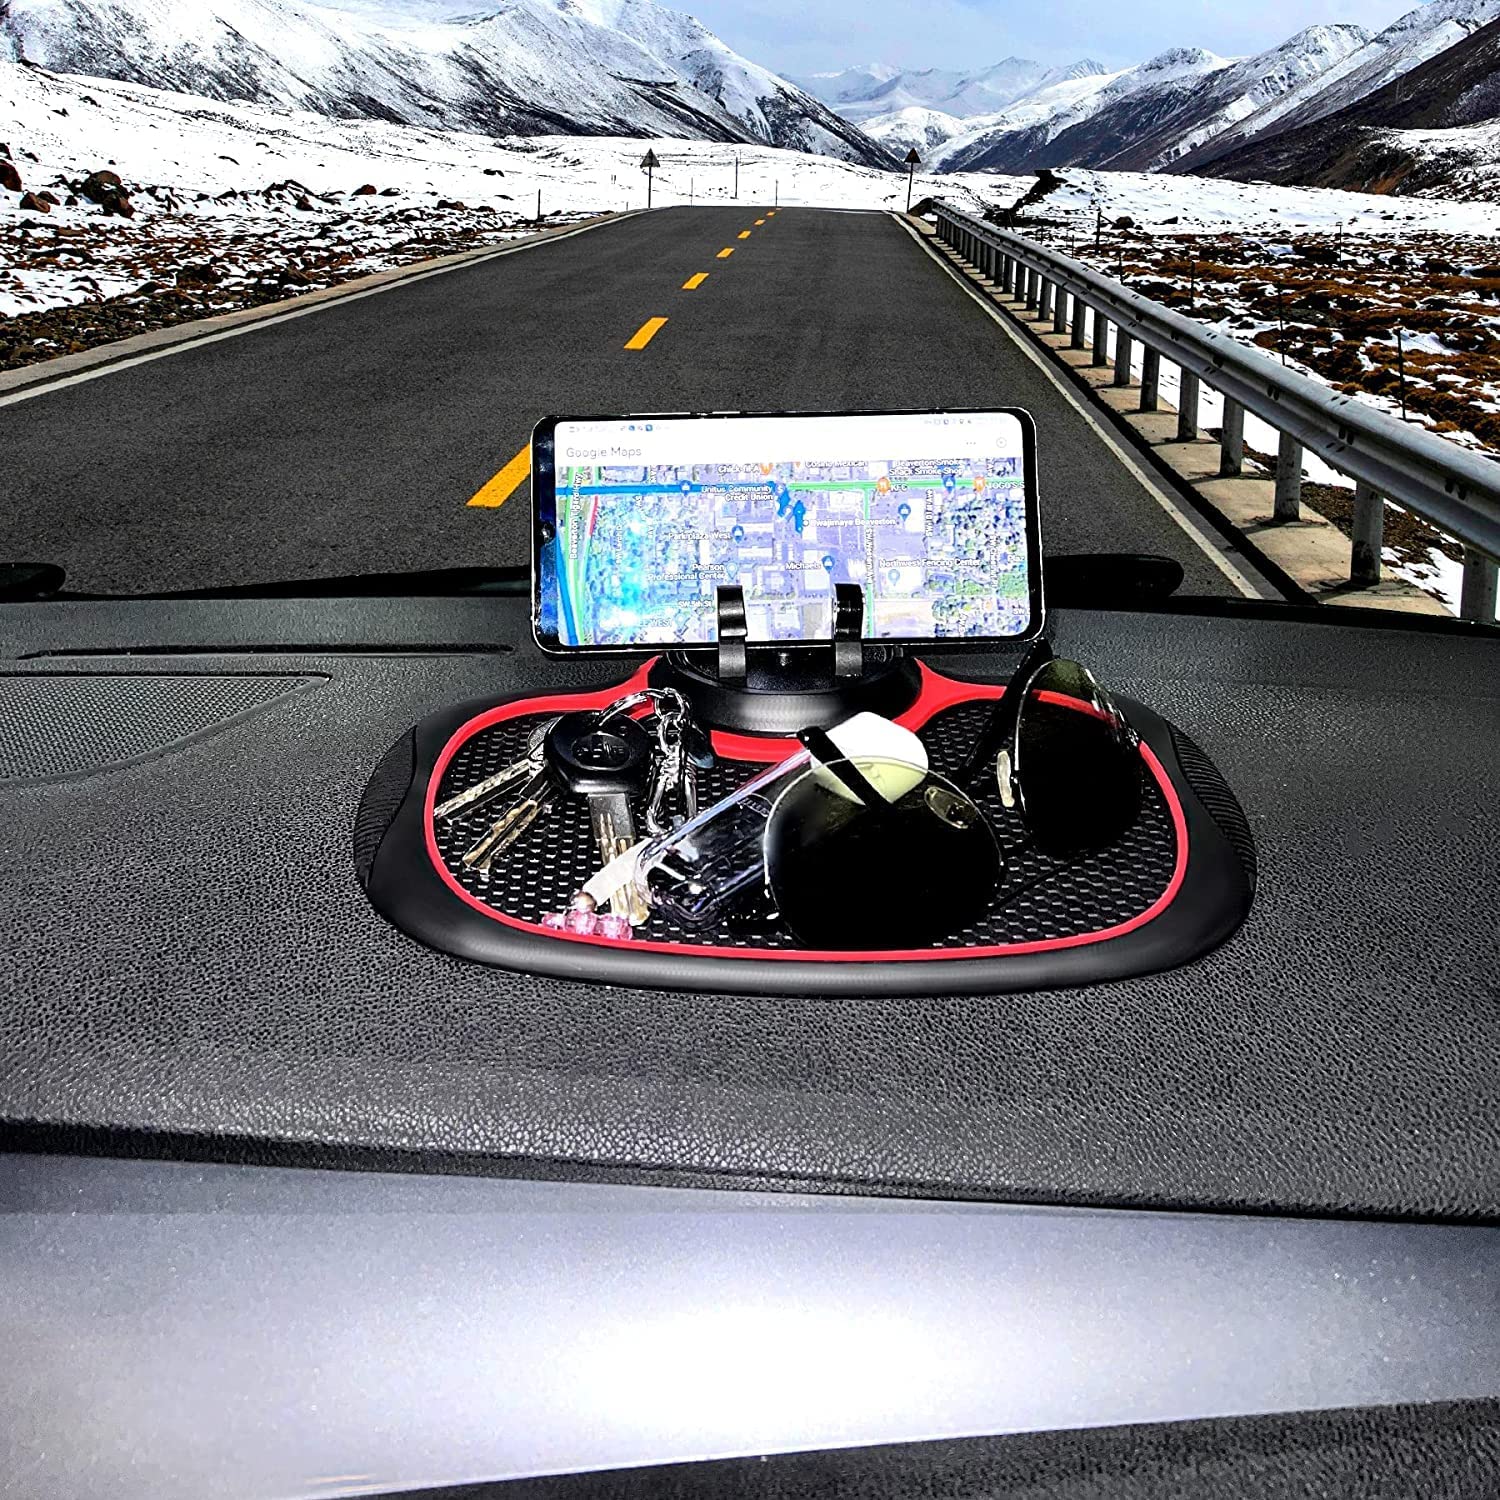 360° Rotating Car Dashboard Mat with Phone Holder - Anti-Slip, Perfect for Smartphone and GPS